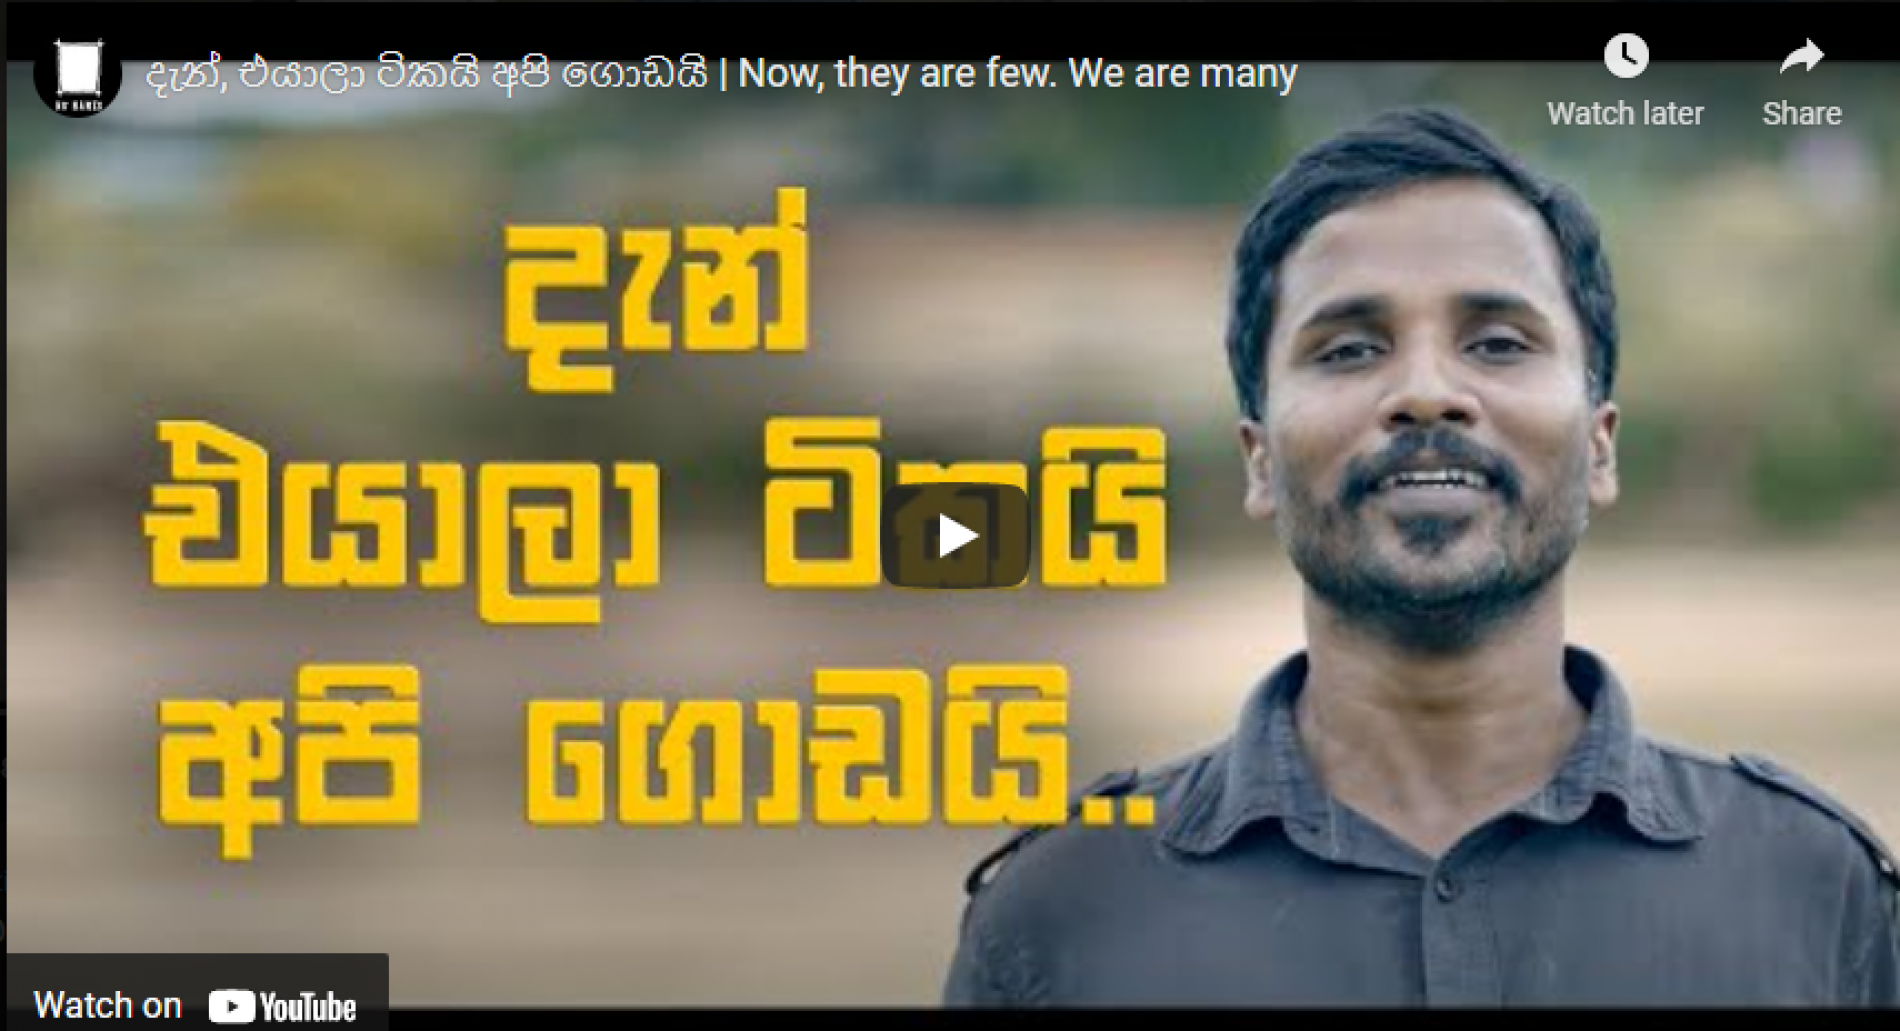 New Music : No Names Collective – දැන්, එයාලා ටිකයි අපි ගොඩයි | Now, they are few. We are many